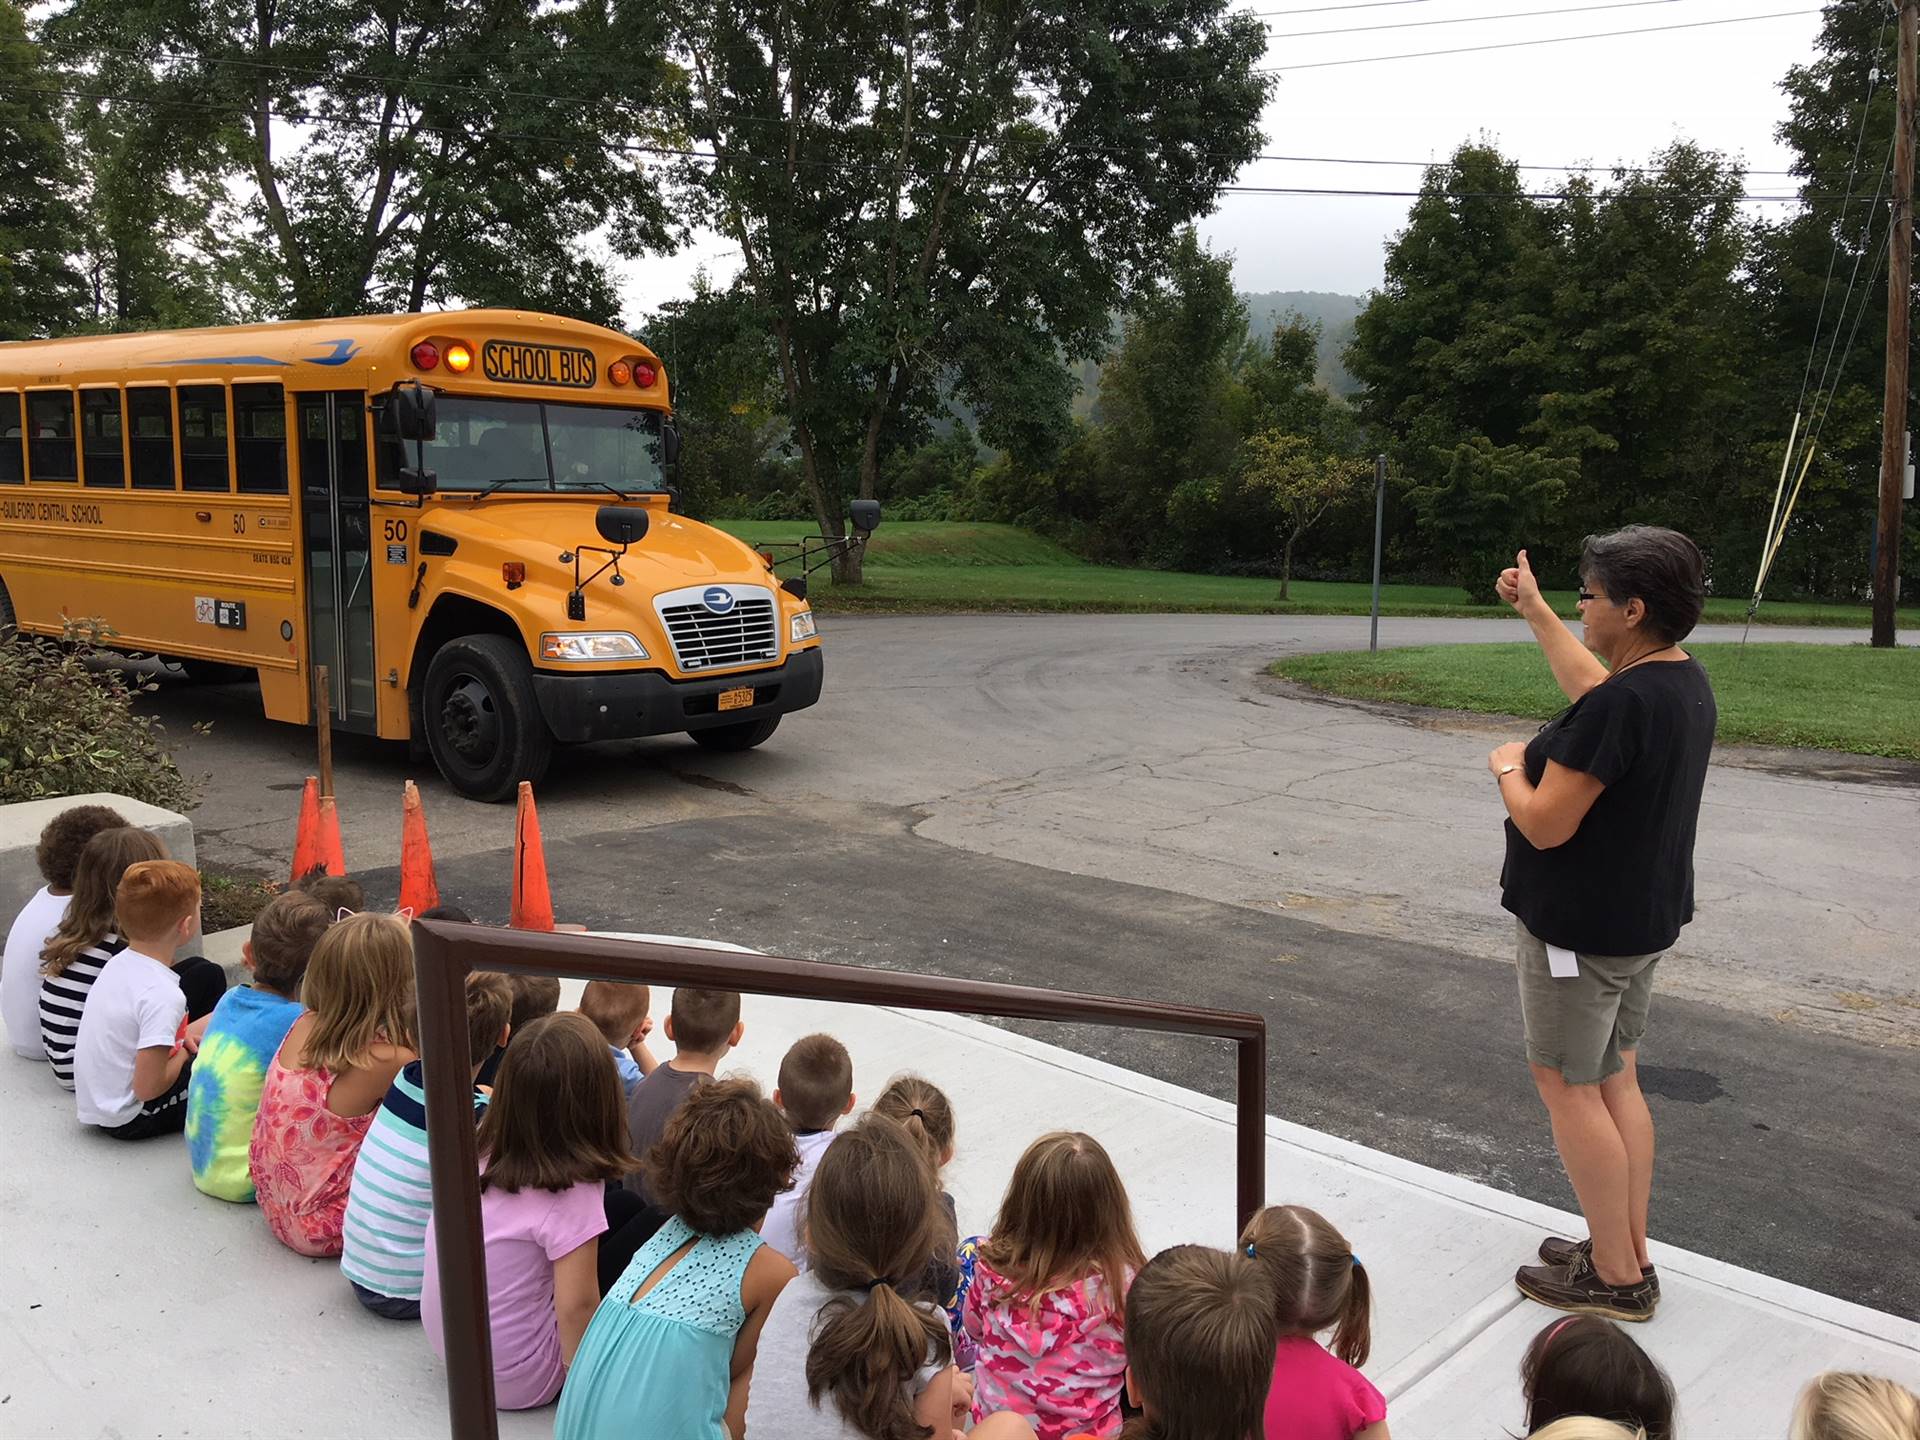 Bus driver talks about lights on the bus with students